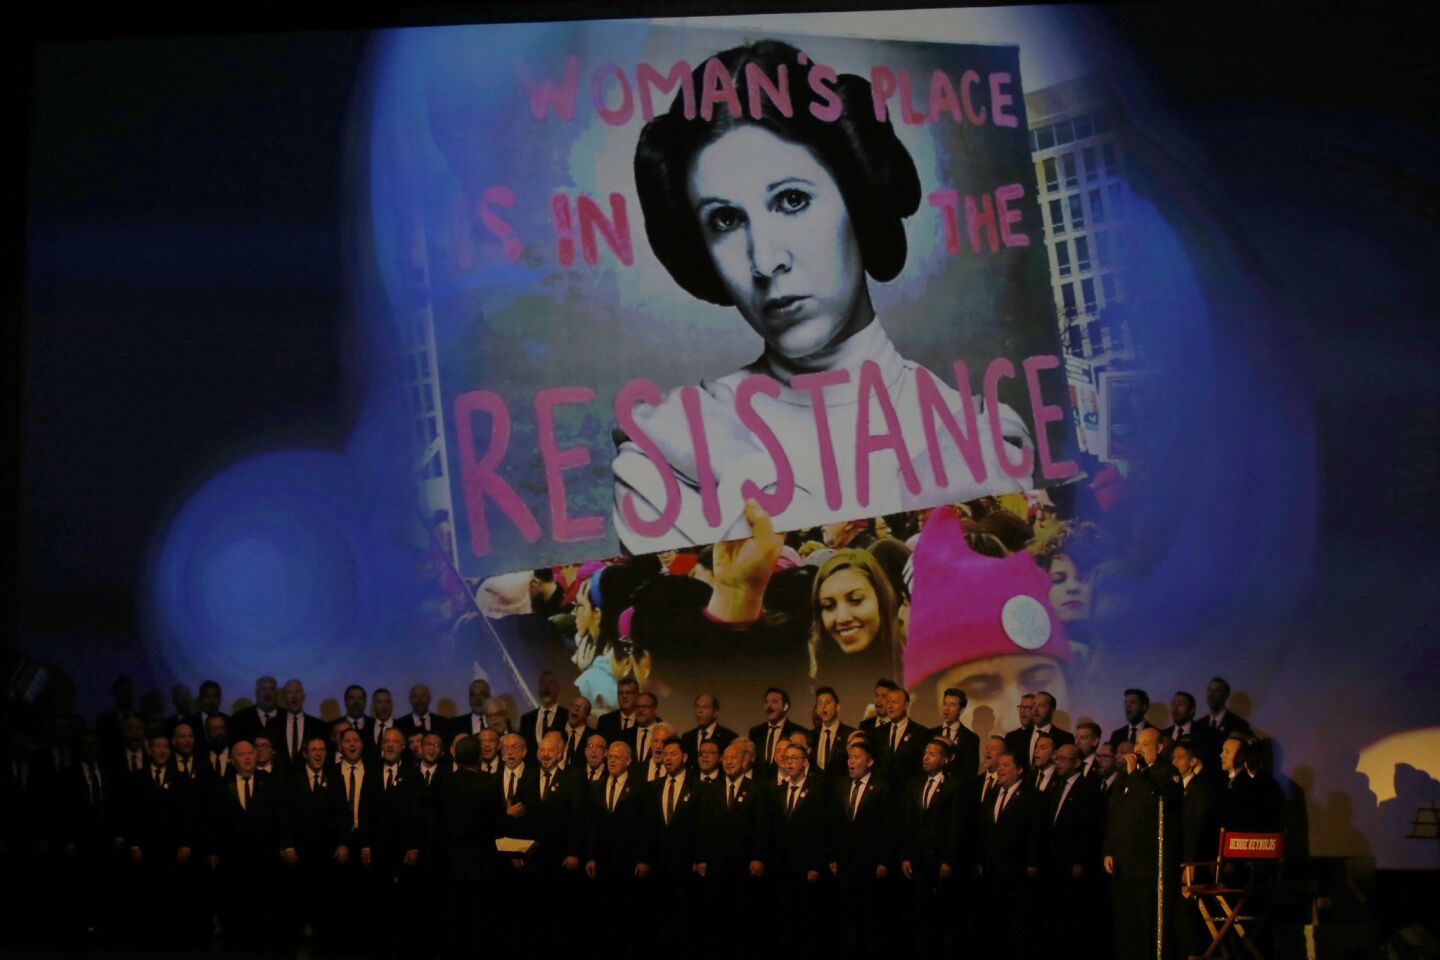 The Gay Men's Chorus of Los Angeles sings during a memorial service as images of Carrie Fisher flash